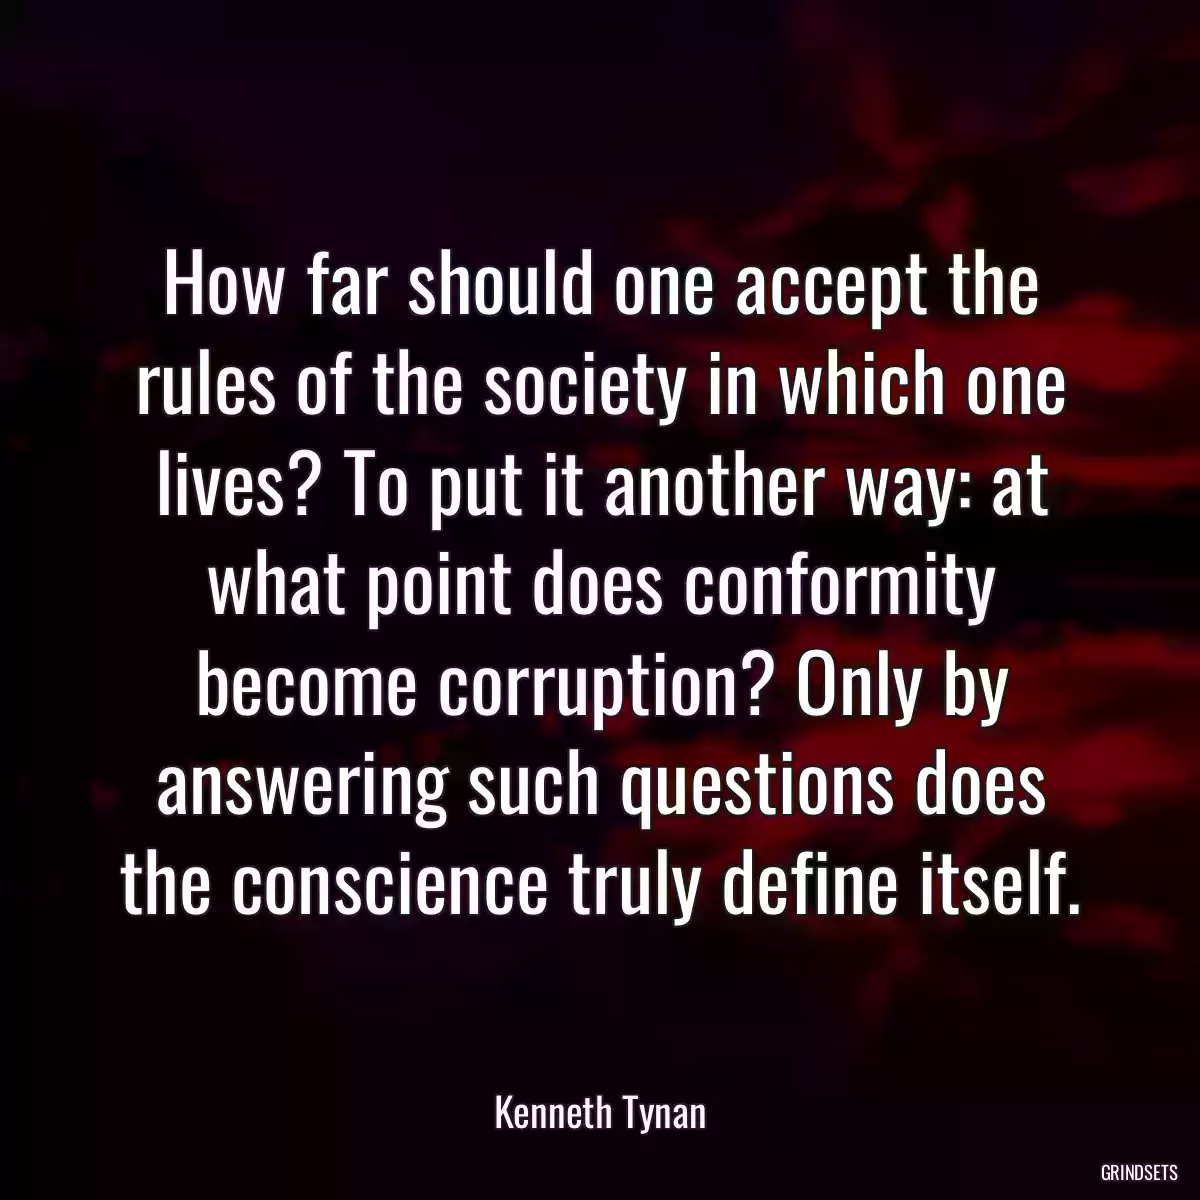 How far should one accept the rules of the society in which one lives? To put it another way: at what point does conformity become corruption? Only by answering such questions does the conscience truly define itself.